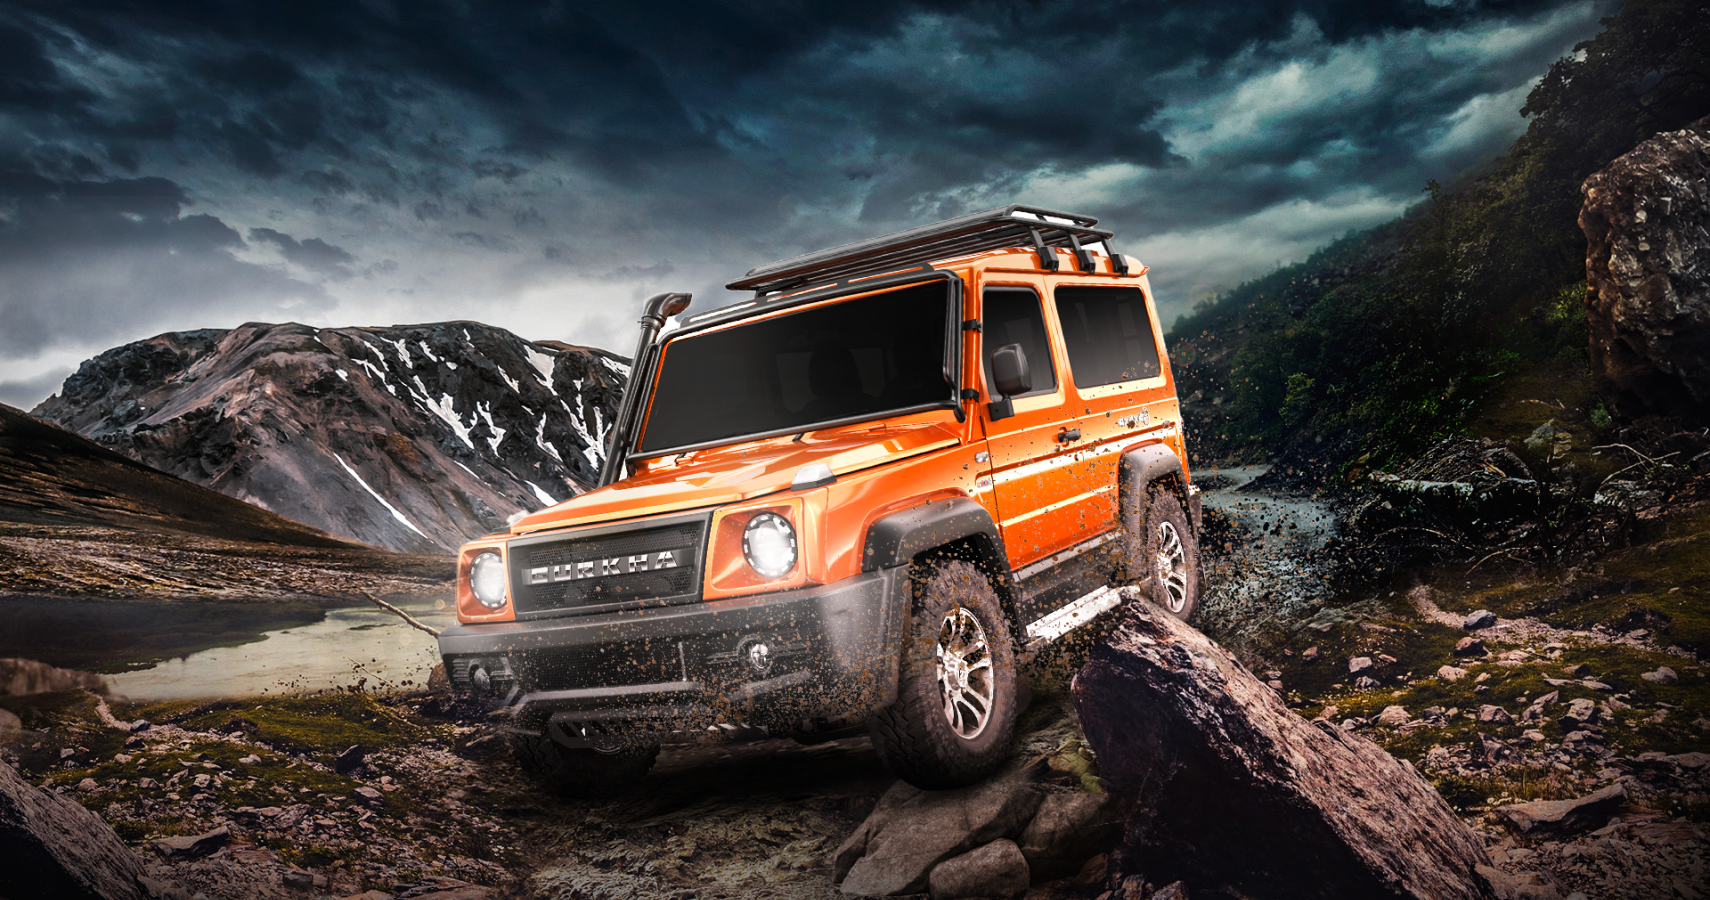 The all-new Force Gurkha is an indianized version of the G-Wagon